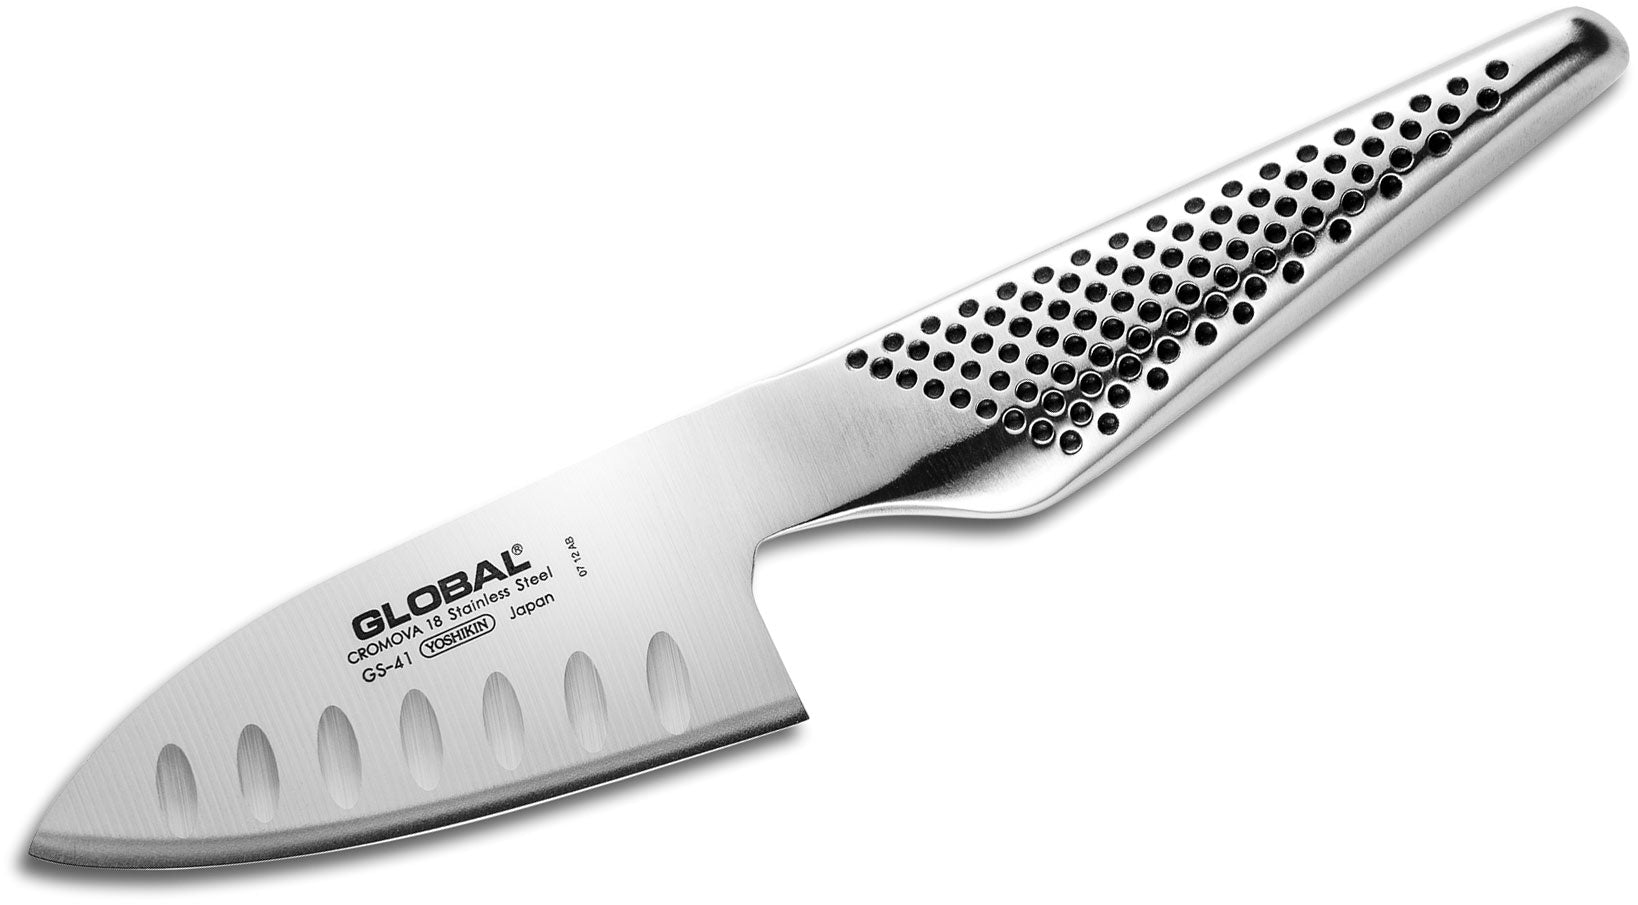 GS Series Chef's Knife